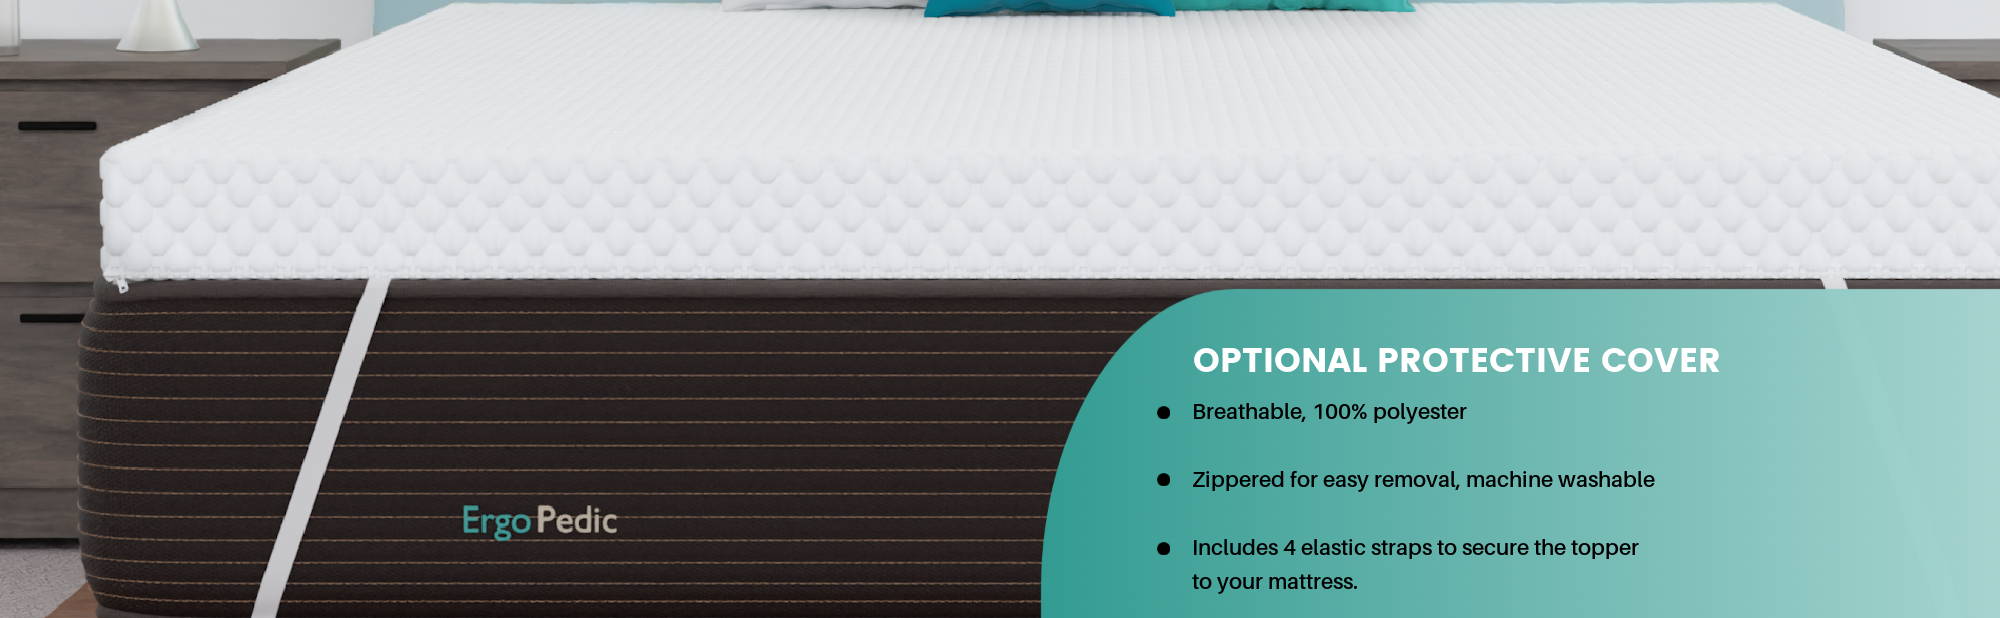 Optional protective cover for the CBD infused topper available: Breathable, 100% polyester, zippered for easy removal and machine washable, includes 4 elastic straps to secure the topper to your mattress.